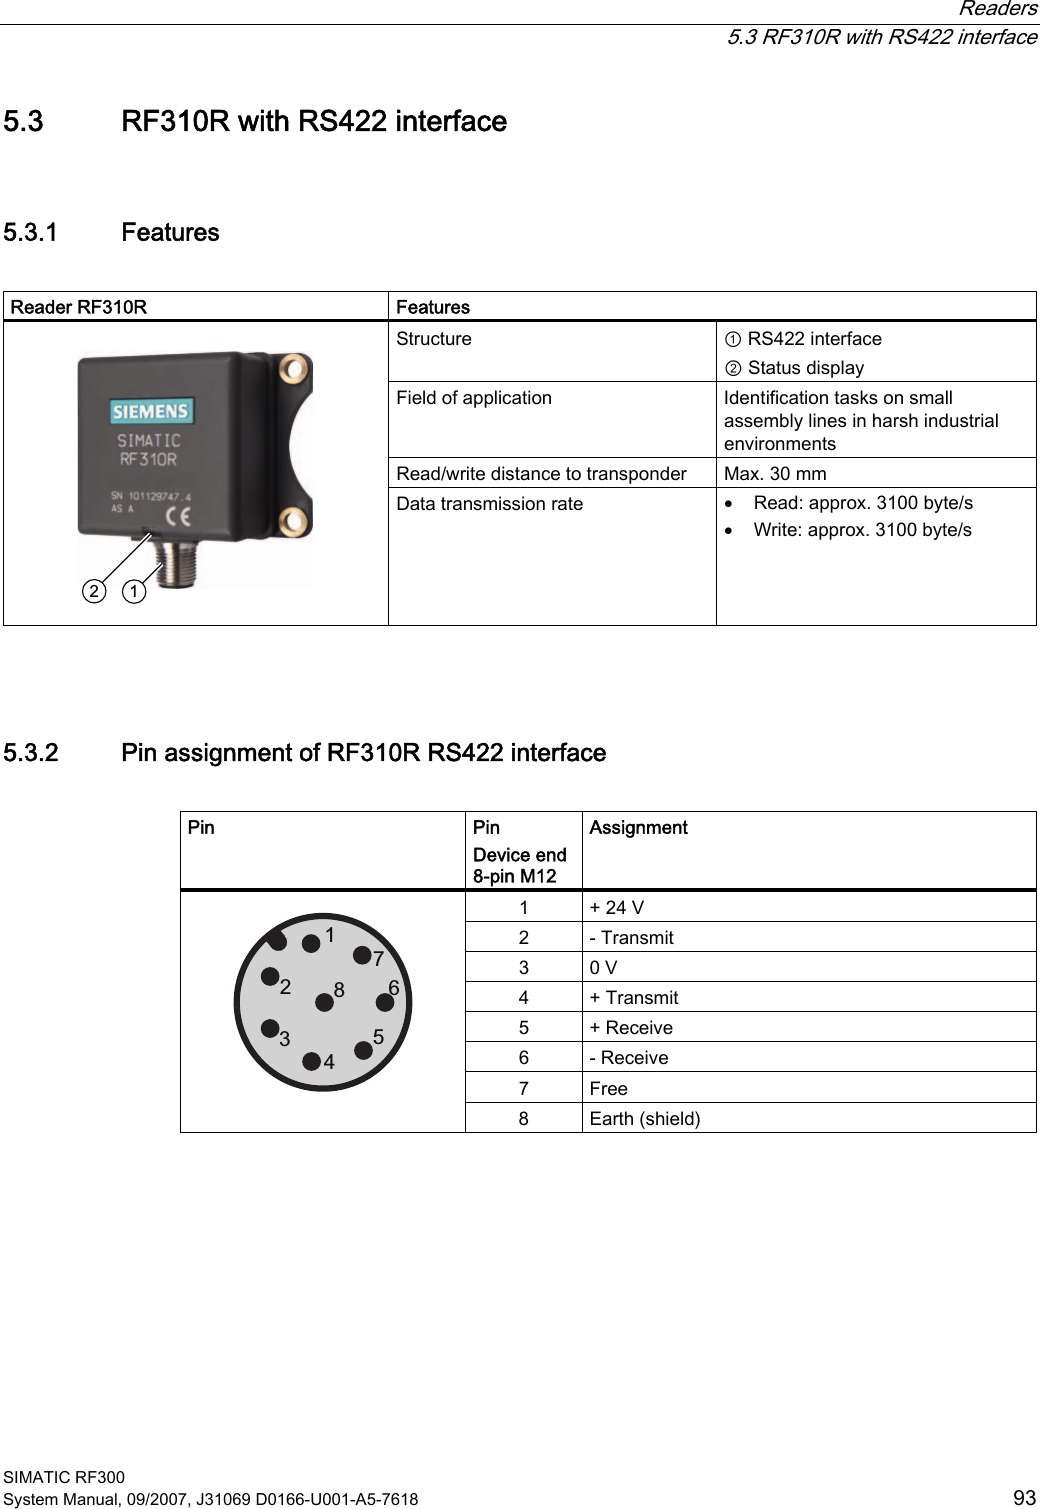  Readers  5.3 RF310R with RS422 interface SIMATIC RF300 System Manual, 09/2007, J31069 D0166-U001-A5-7618  93 5.3 RF310R with RS422 interface 5.3.1 Features  Reader RF310R  Features Structure  ① RS422 interface ② Status display Field of application  Identification tasks on small assembly lines in harsh industrial environments Read/write distance to transponder  Max. 30 mm    Data transmission rate  • Read: approx. 3100 byte/s • Write: approx. 3100 byte/s  5.3.2 Pin assignment of RF310R RS422 interface  Pin  Pin Device end 8-pin M12 Assignment 1  + 24 V 2  - Transmit 3  0 V 4  + Transmit 5  + Receive 6  - Receive 7  Free    8  Earth (shield)  